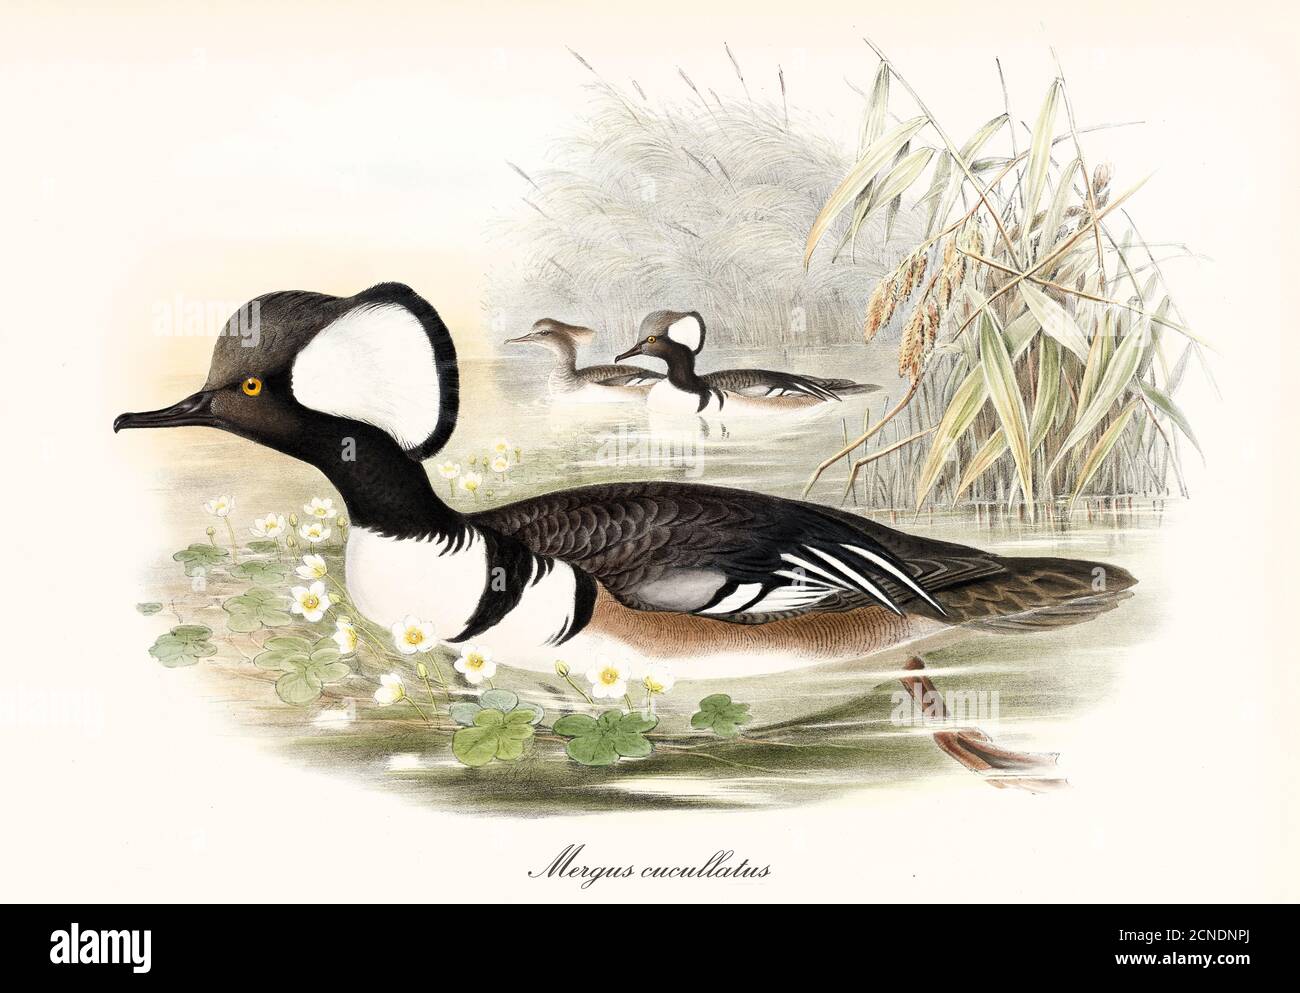 Multicolor duck looking bird Hooded Merganser (Lophodytes cucullatus) with arched black beak swimming in pond water. Art by John Gould 1862-1873 Stock Photo